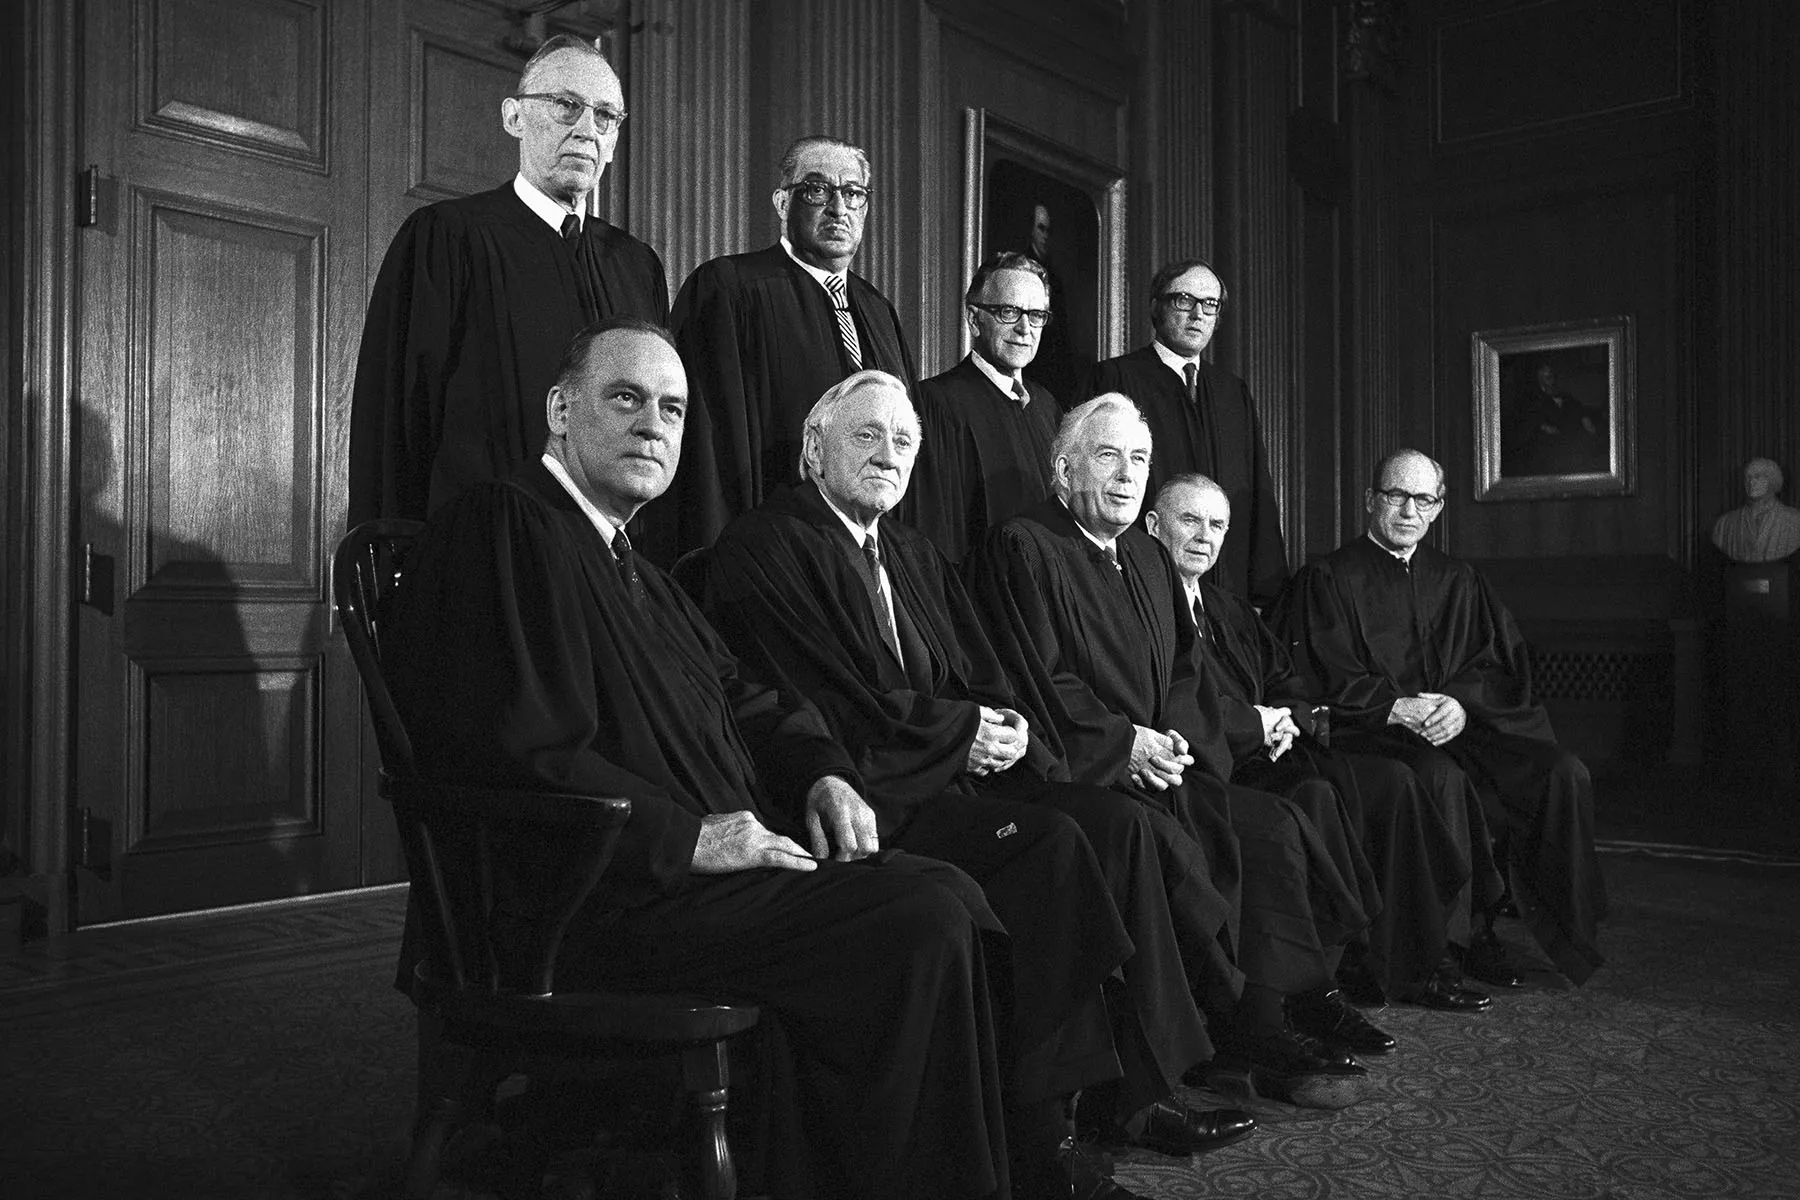 Justices of the Supreme Court of the United States pose for an official portrait.